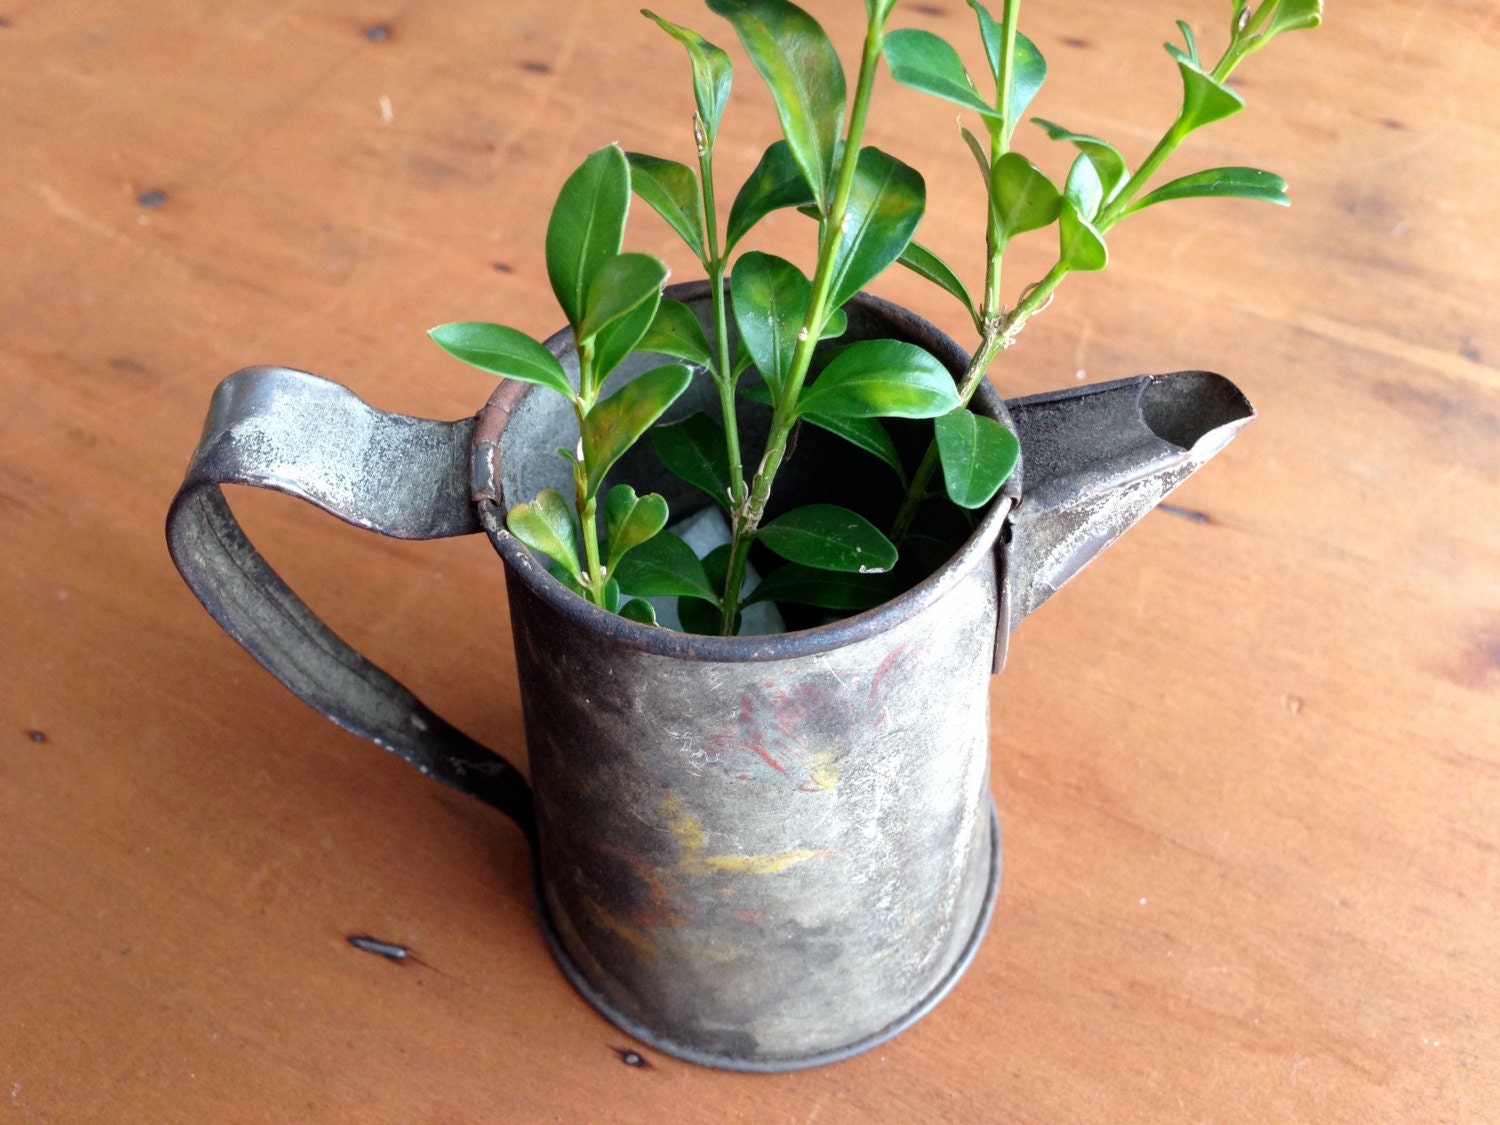 Miniature watering can farmhouse decor - thefrolickingfrog